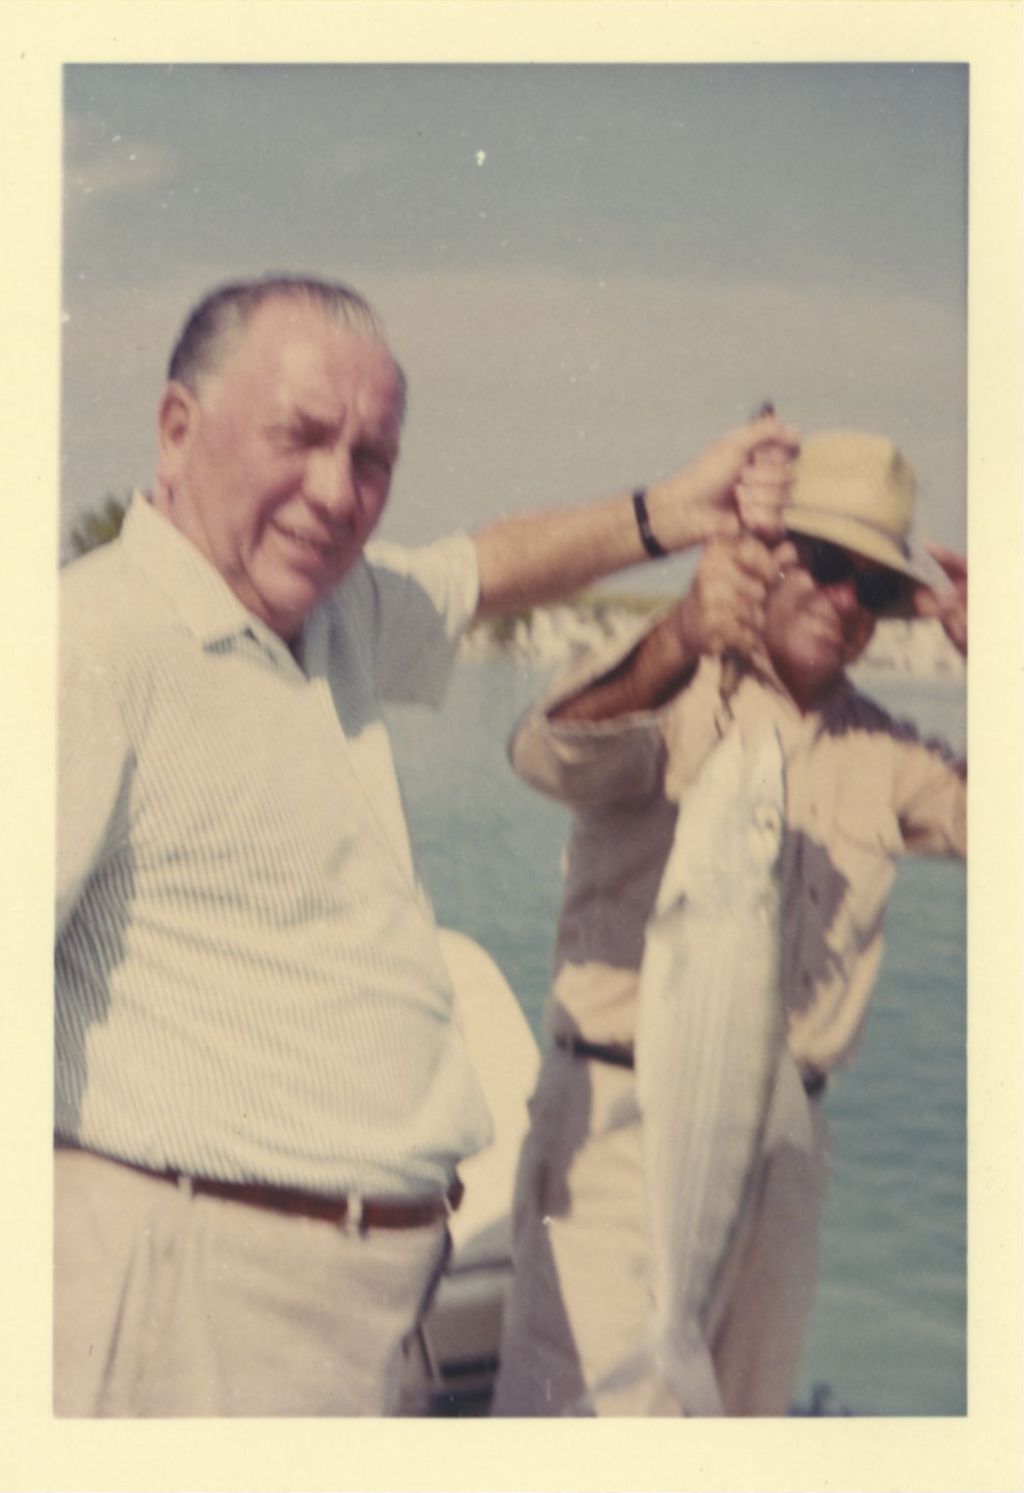 Miniature of Richard J. Daley and a man displaying their catch